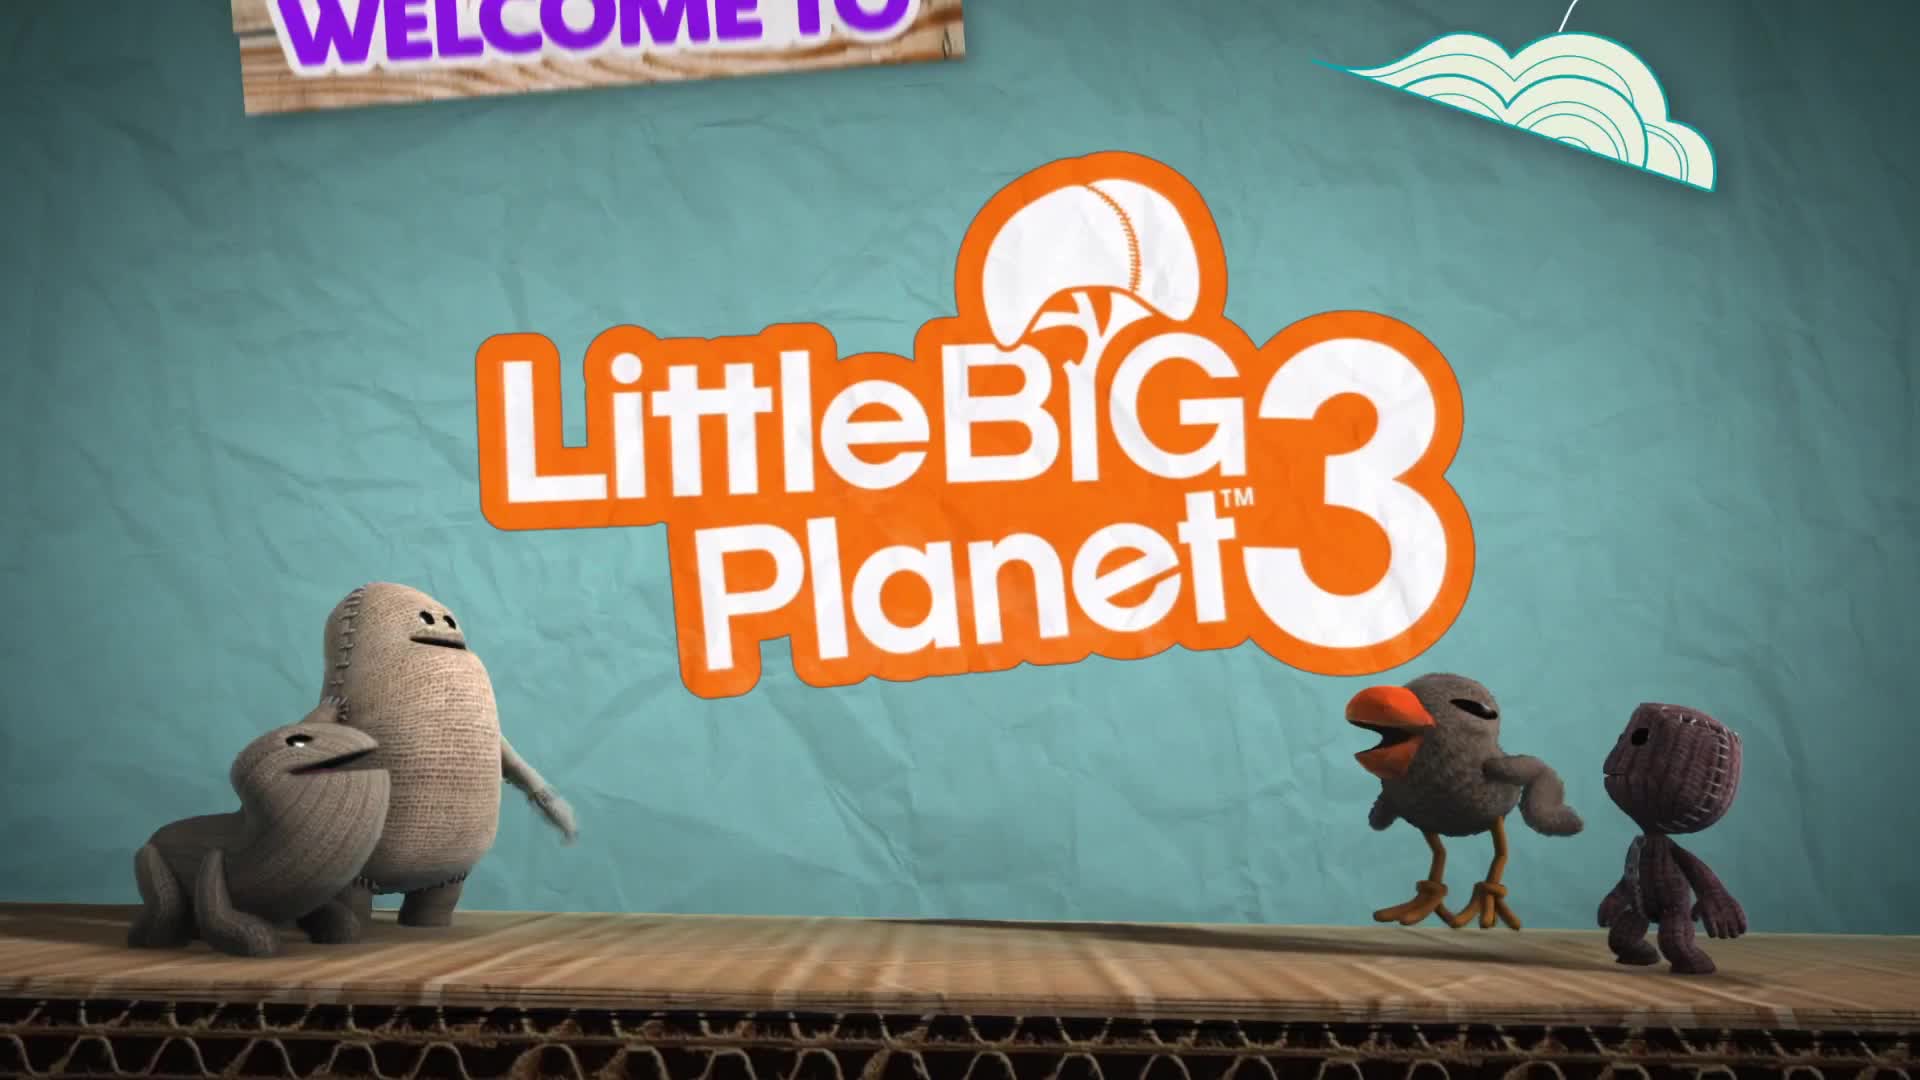 LittleBigPlanet 3 - Create and share